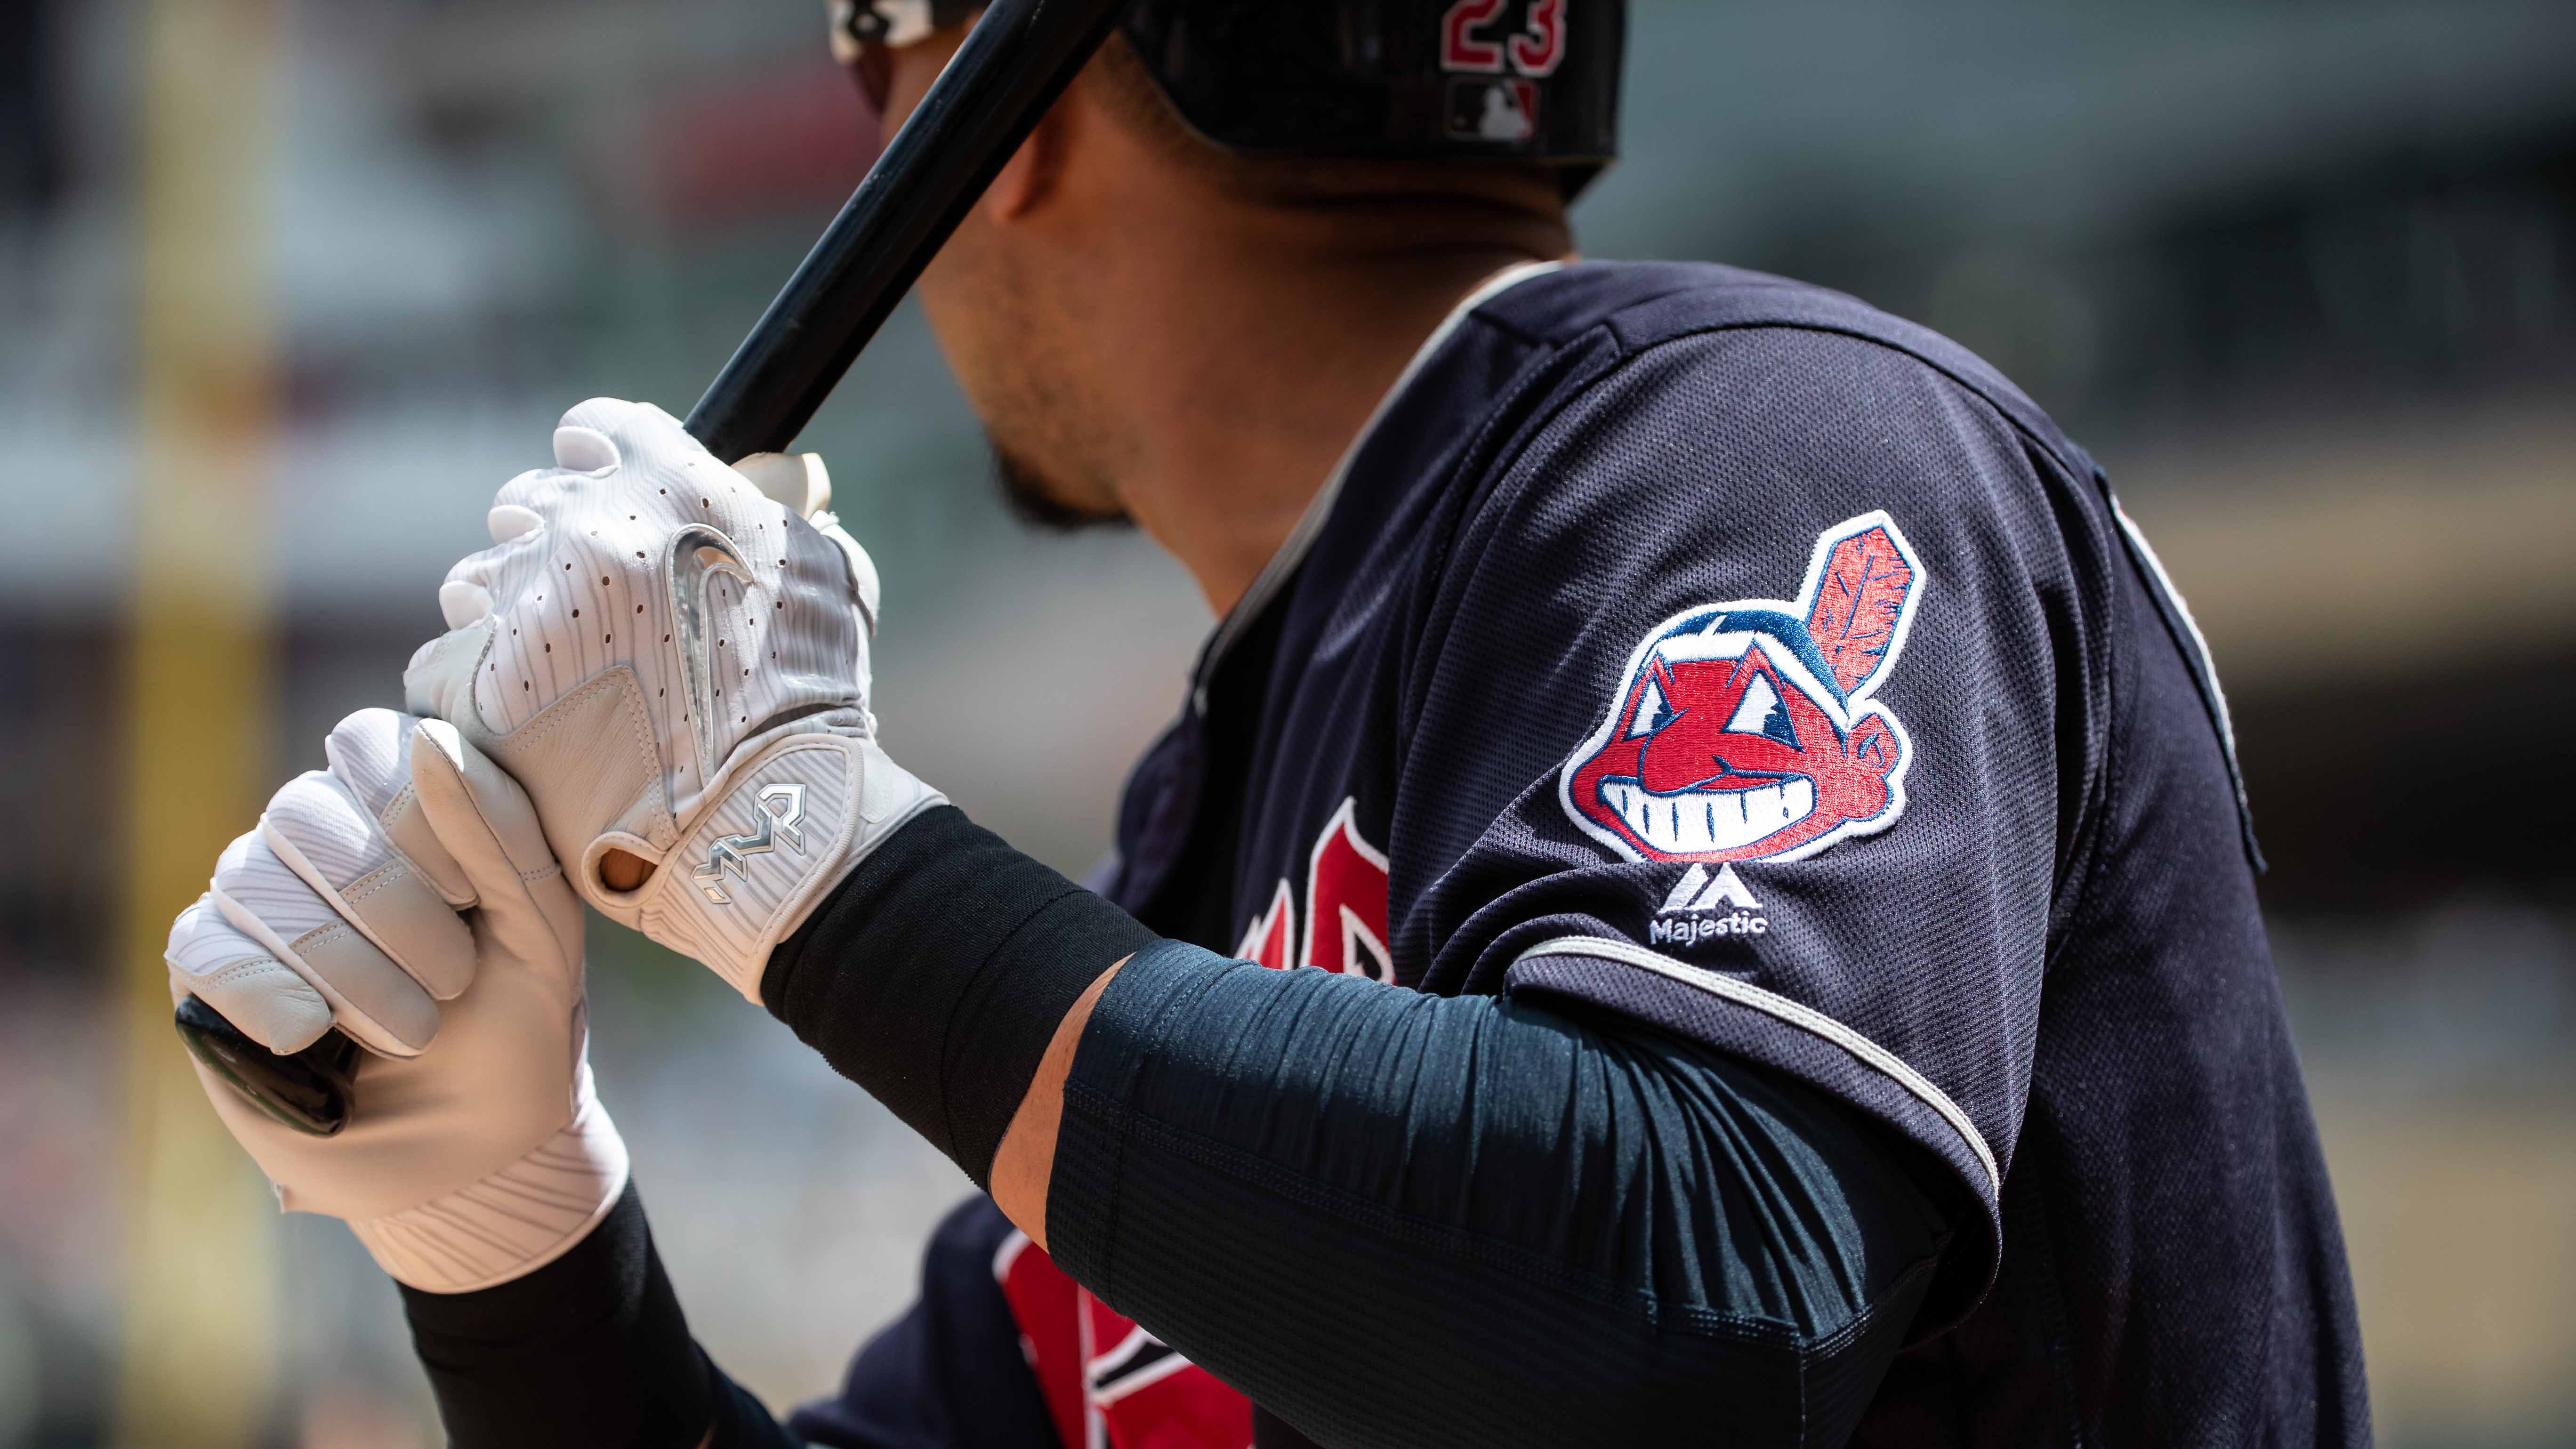 Reports: Cleveland Indians To Change Team Name